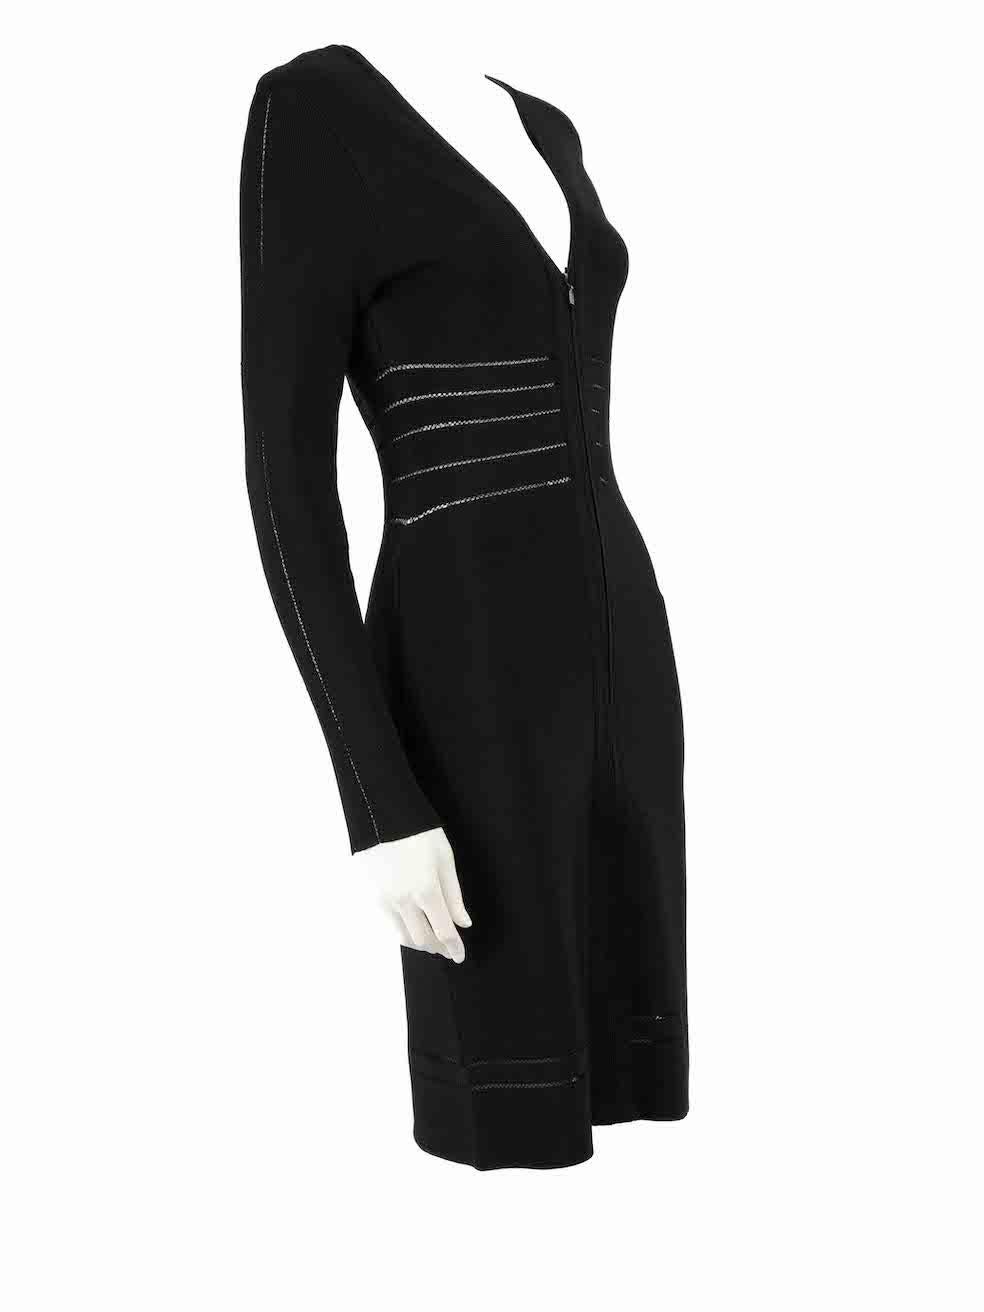 CONDITION is Very good. Minimal wear to dress is evident. Minimal wear to fabric composition with a handful of very small plucks to the weave found throughout on this used Herve Leger designer resale item.
 
 Details
 Black
 Synthetic
 Knee length